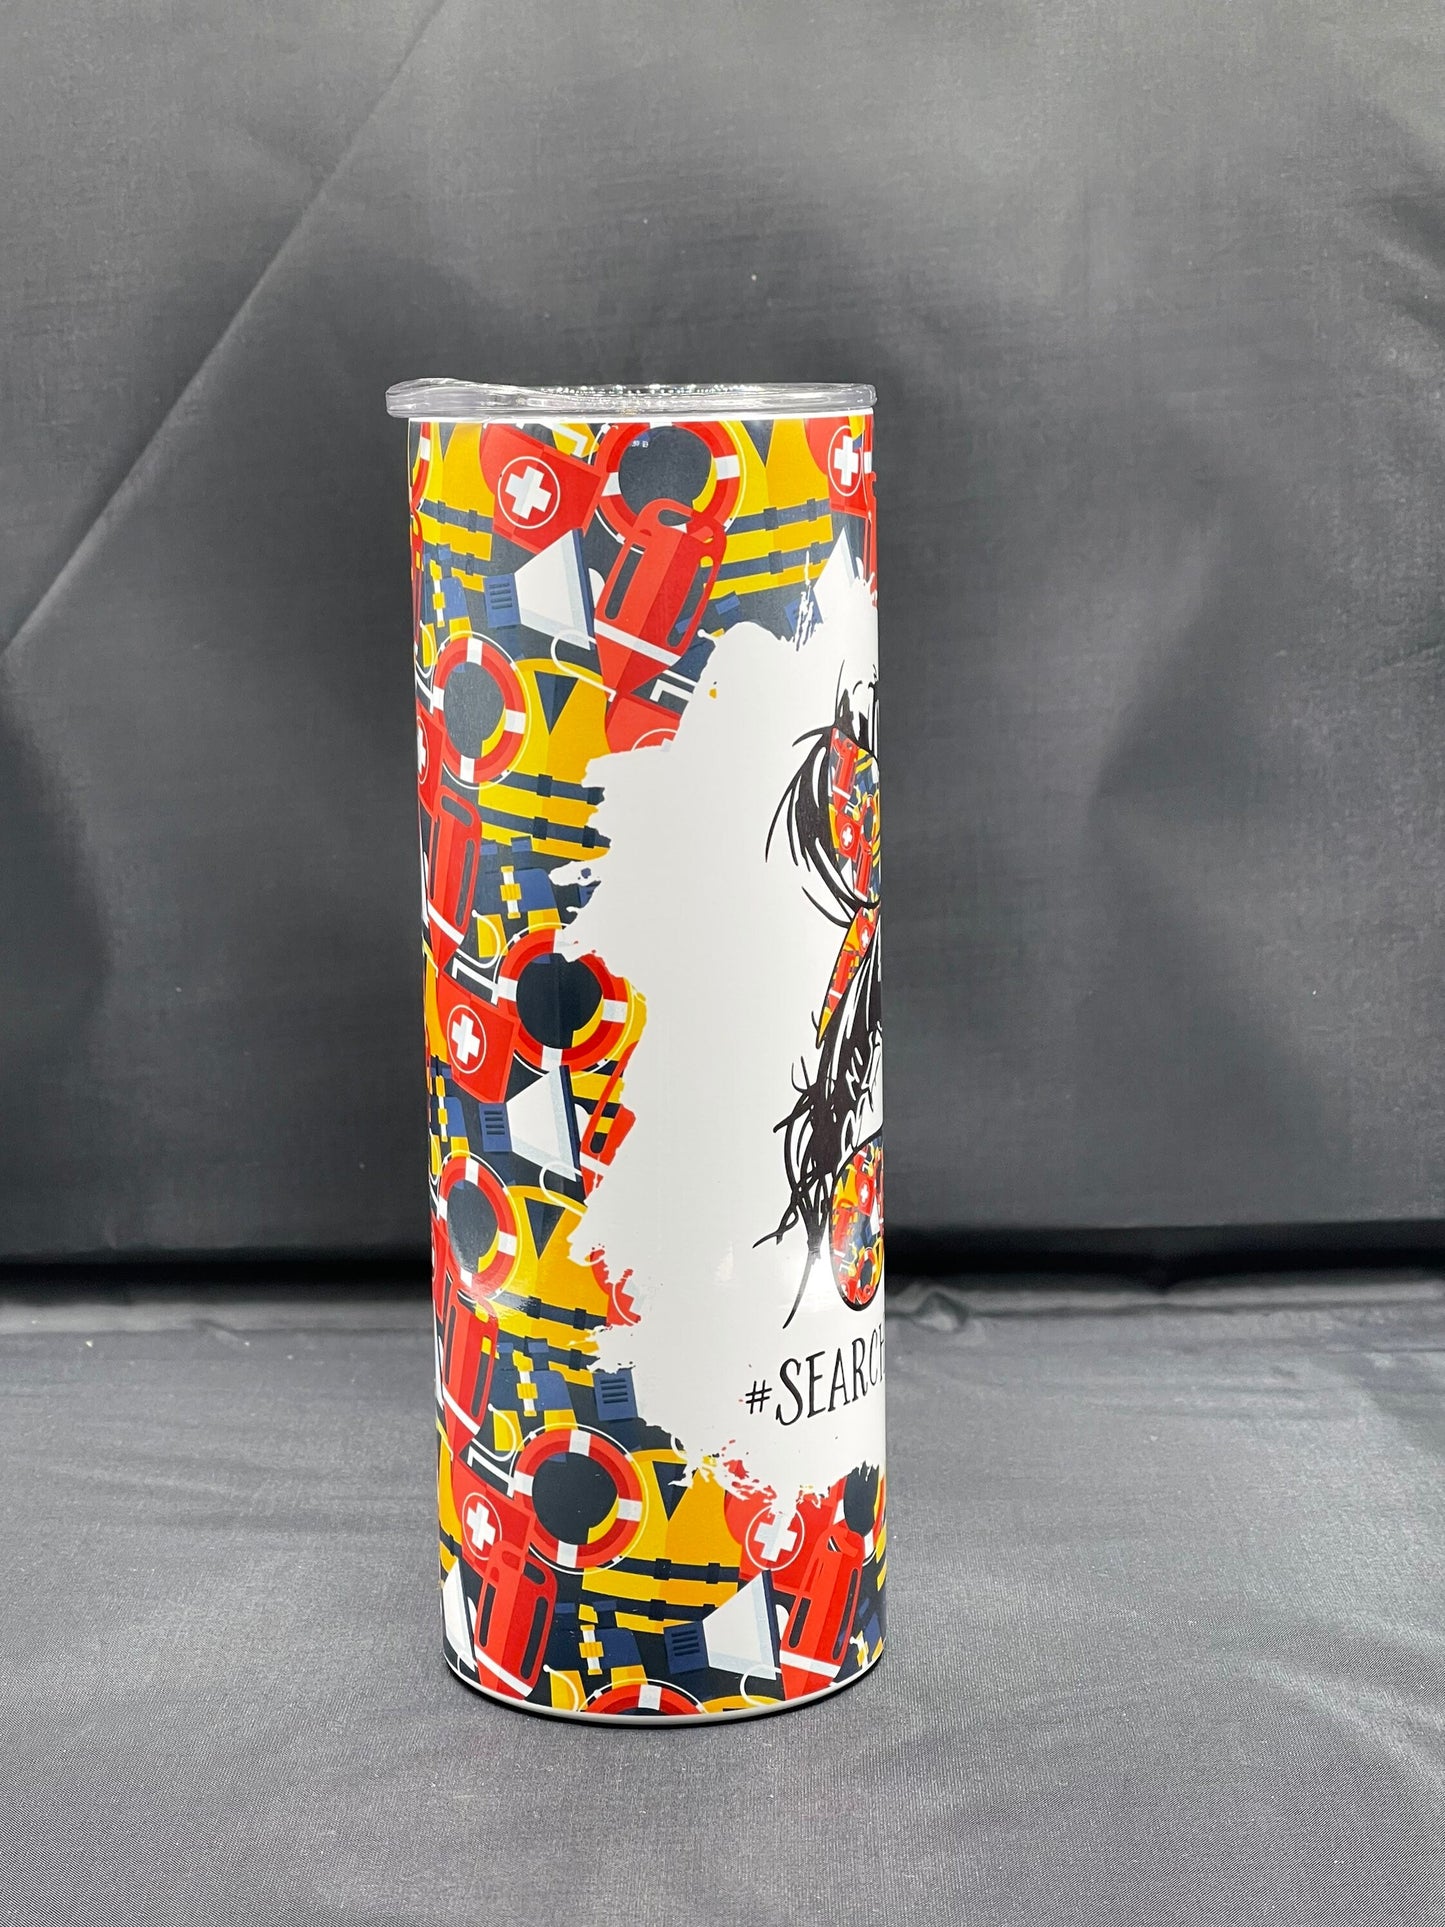 Search and rescue life tumbler